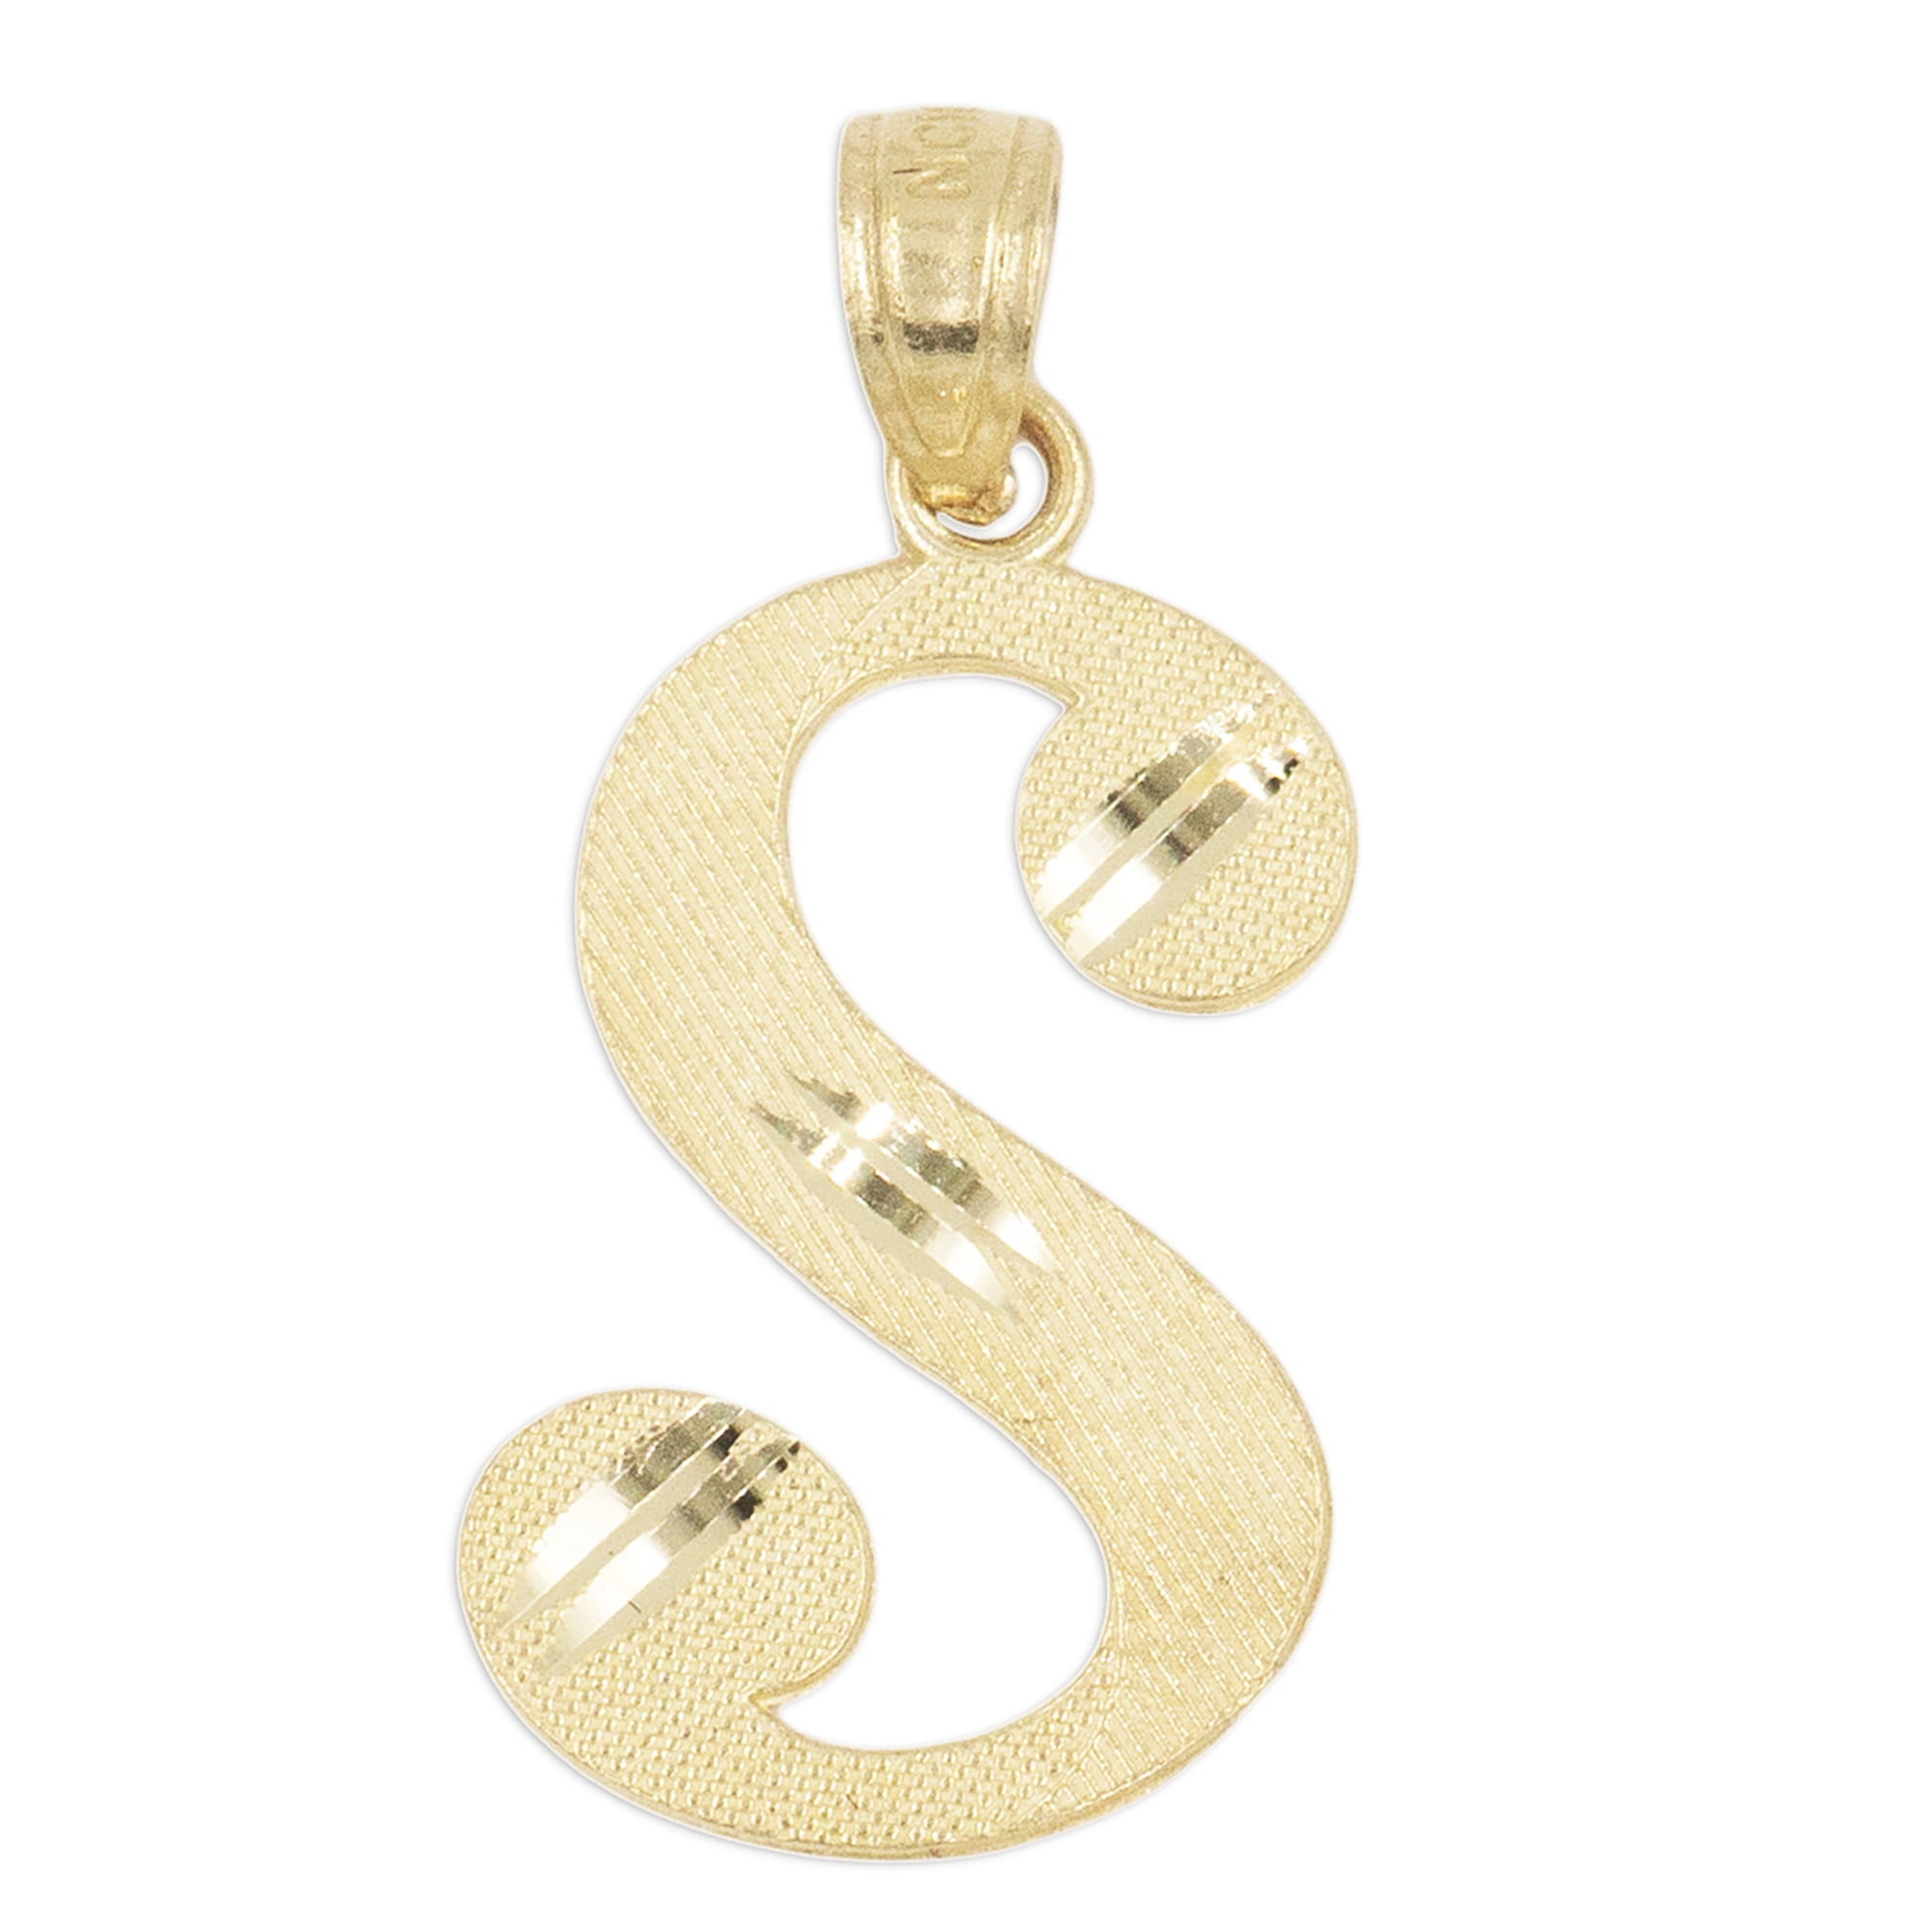 10k Yellow Gold Holy Communion Charm With Lobster Claw Clasp Charms for Bracelets and Necklaces